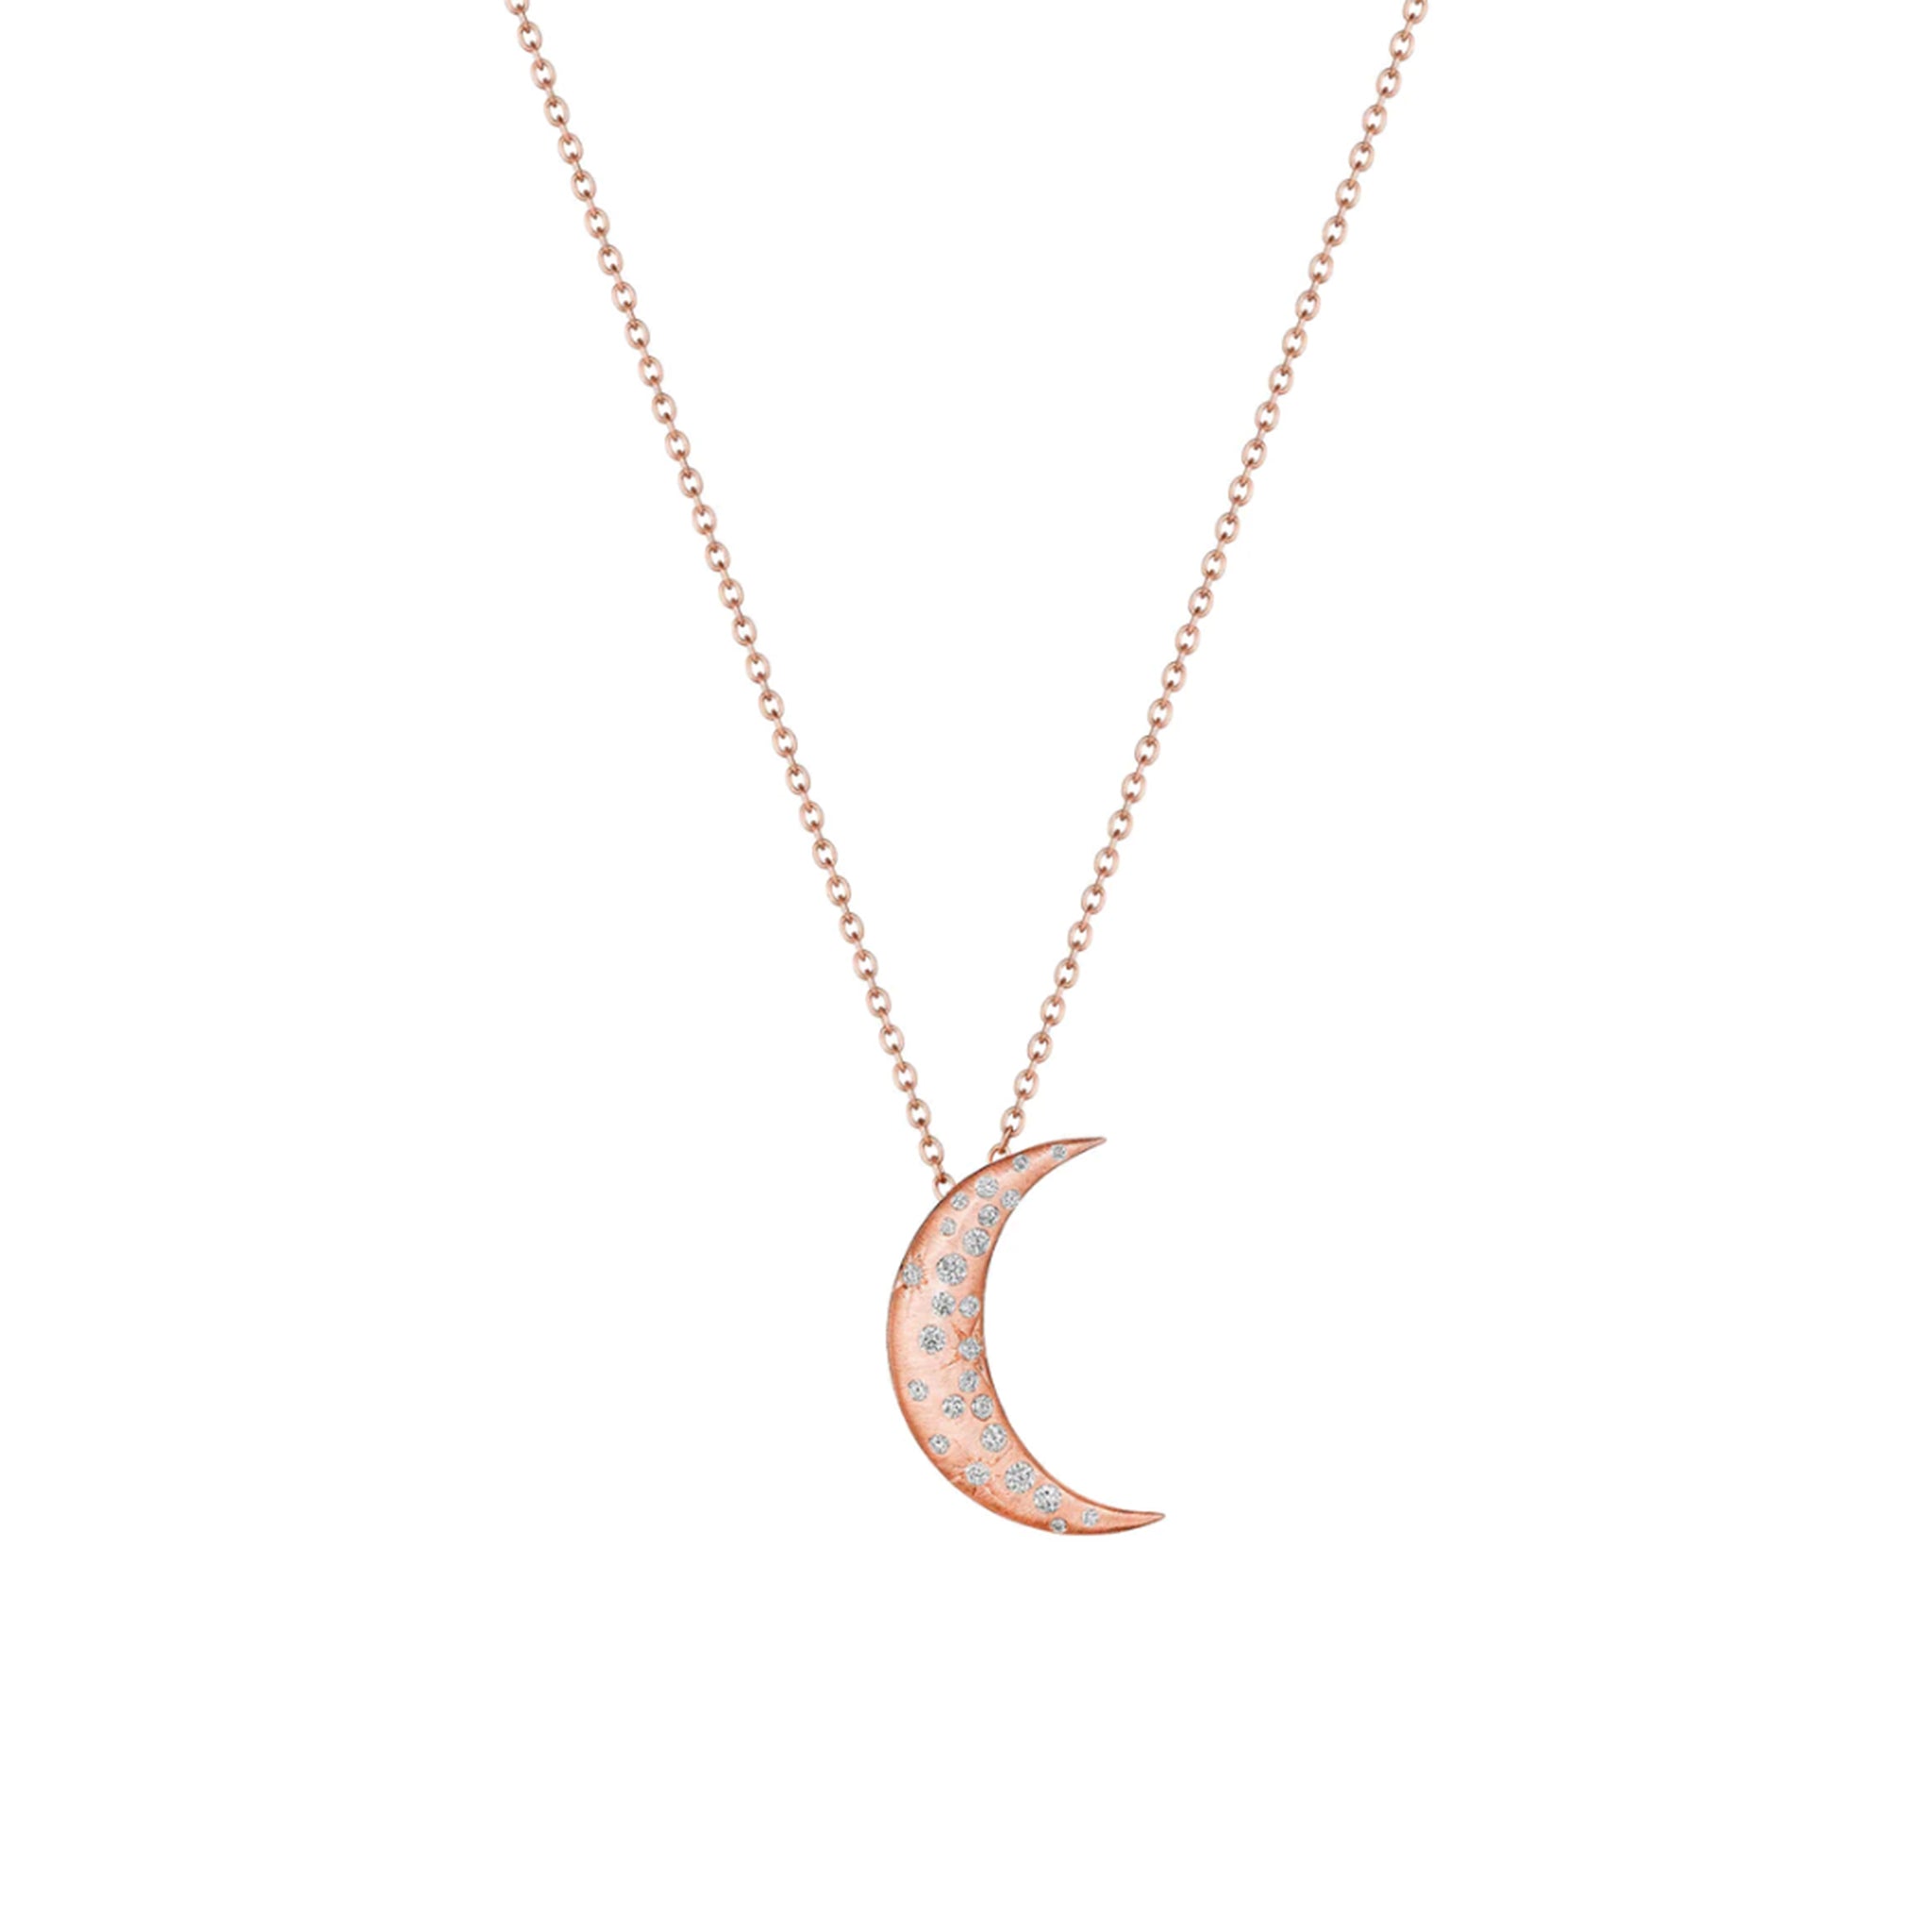 Penny Preville Galaxy Crescent Moon Diamond Necklace - Be On Park